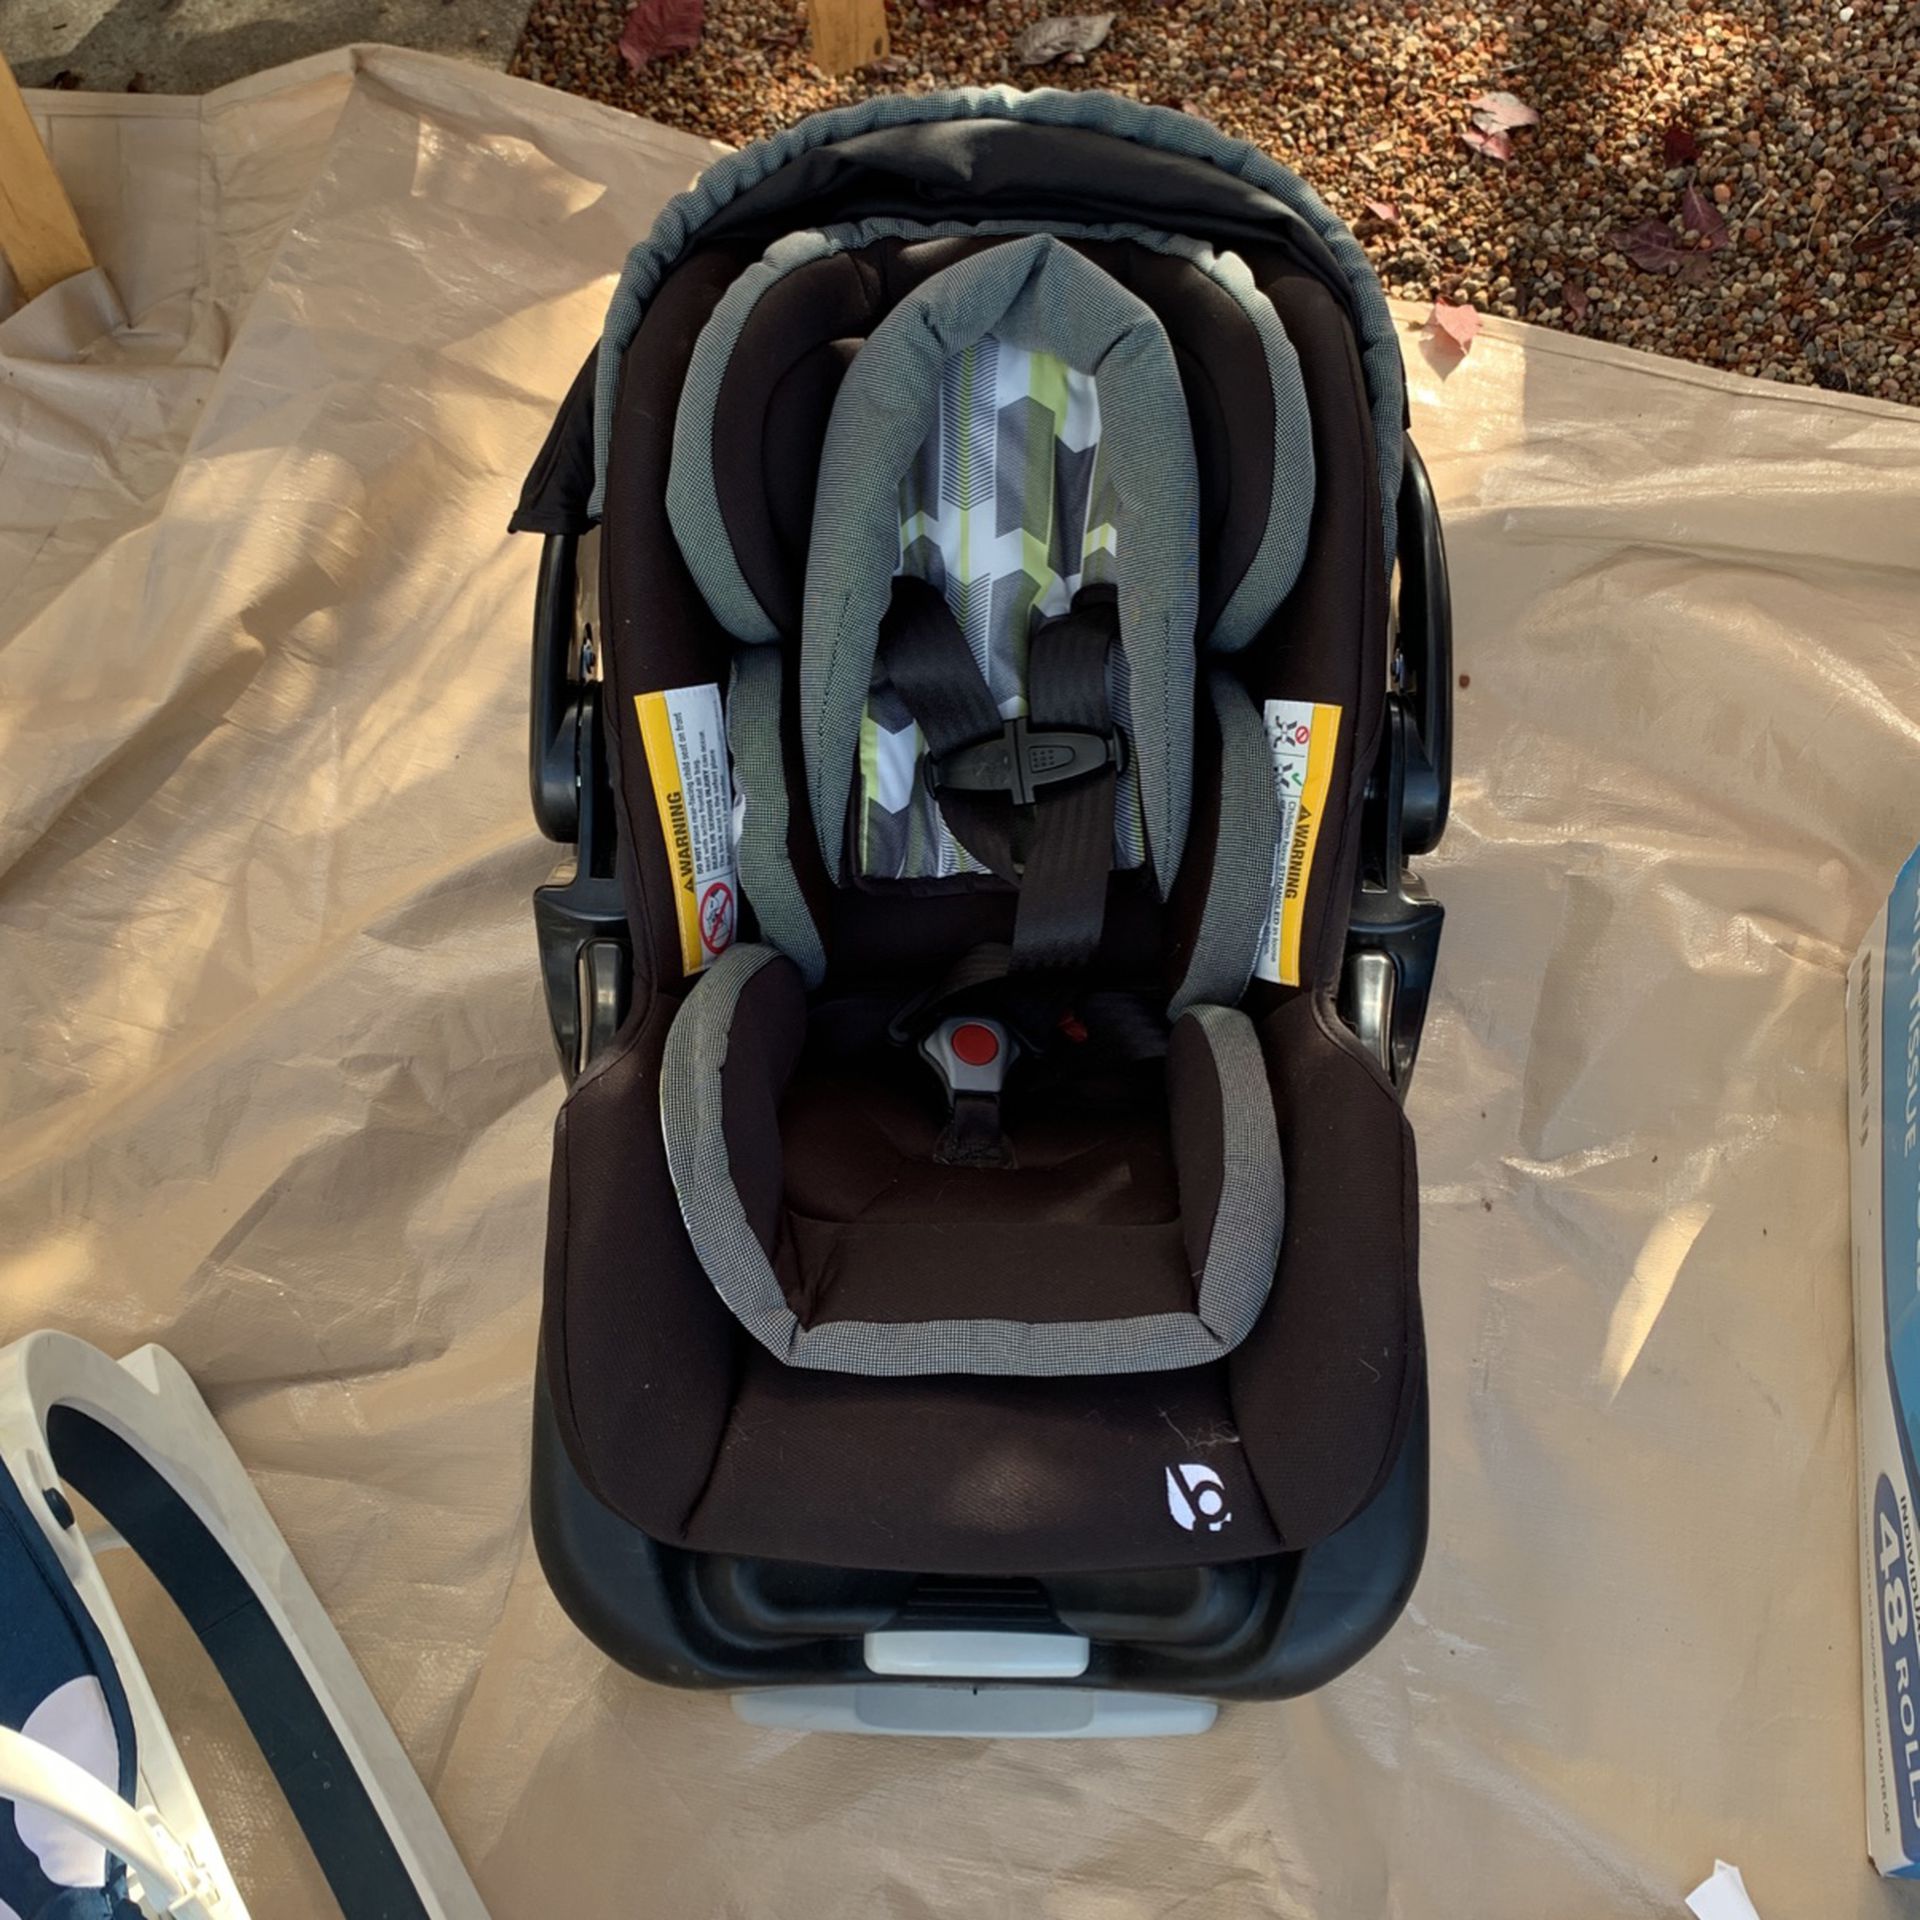 Baby Trend Carseat 